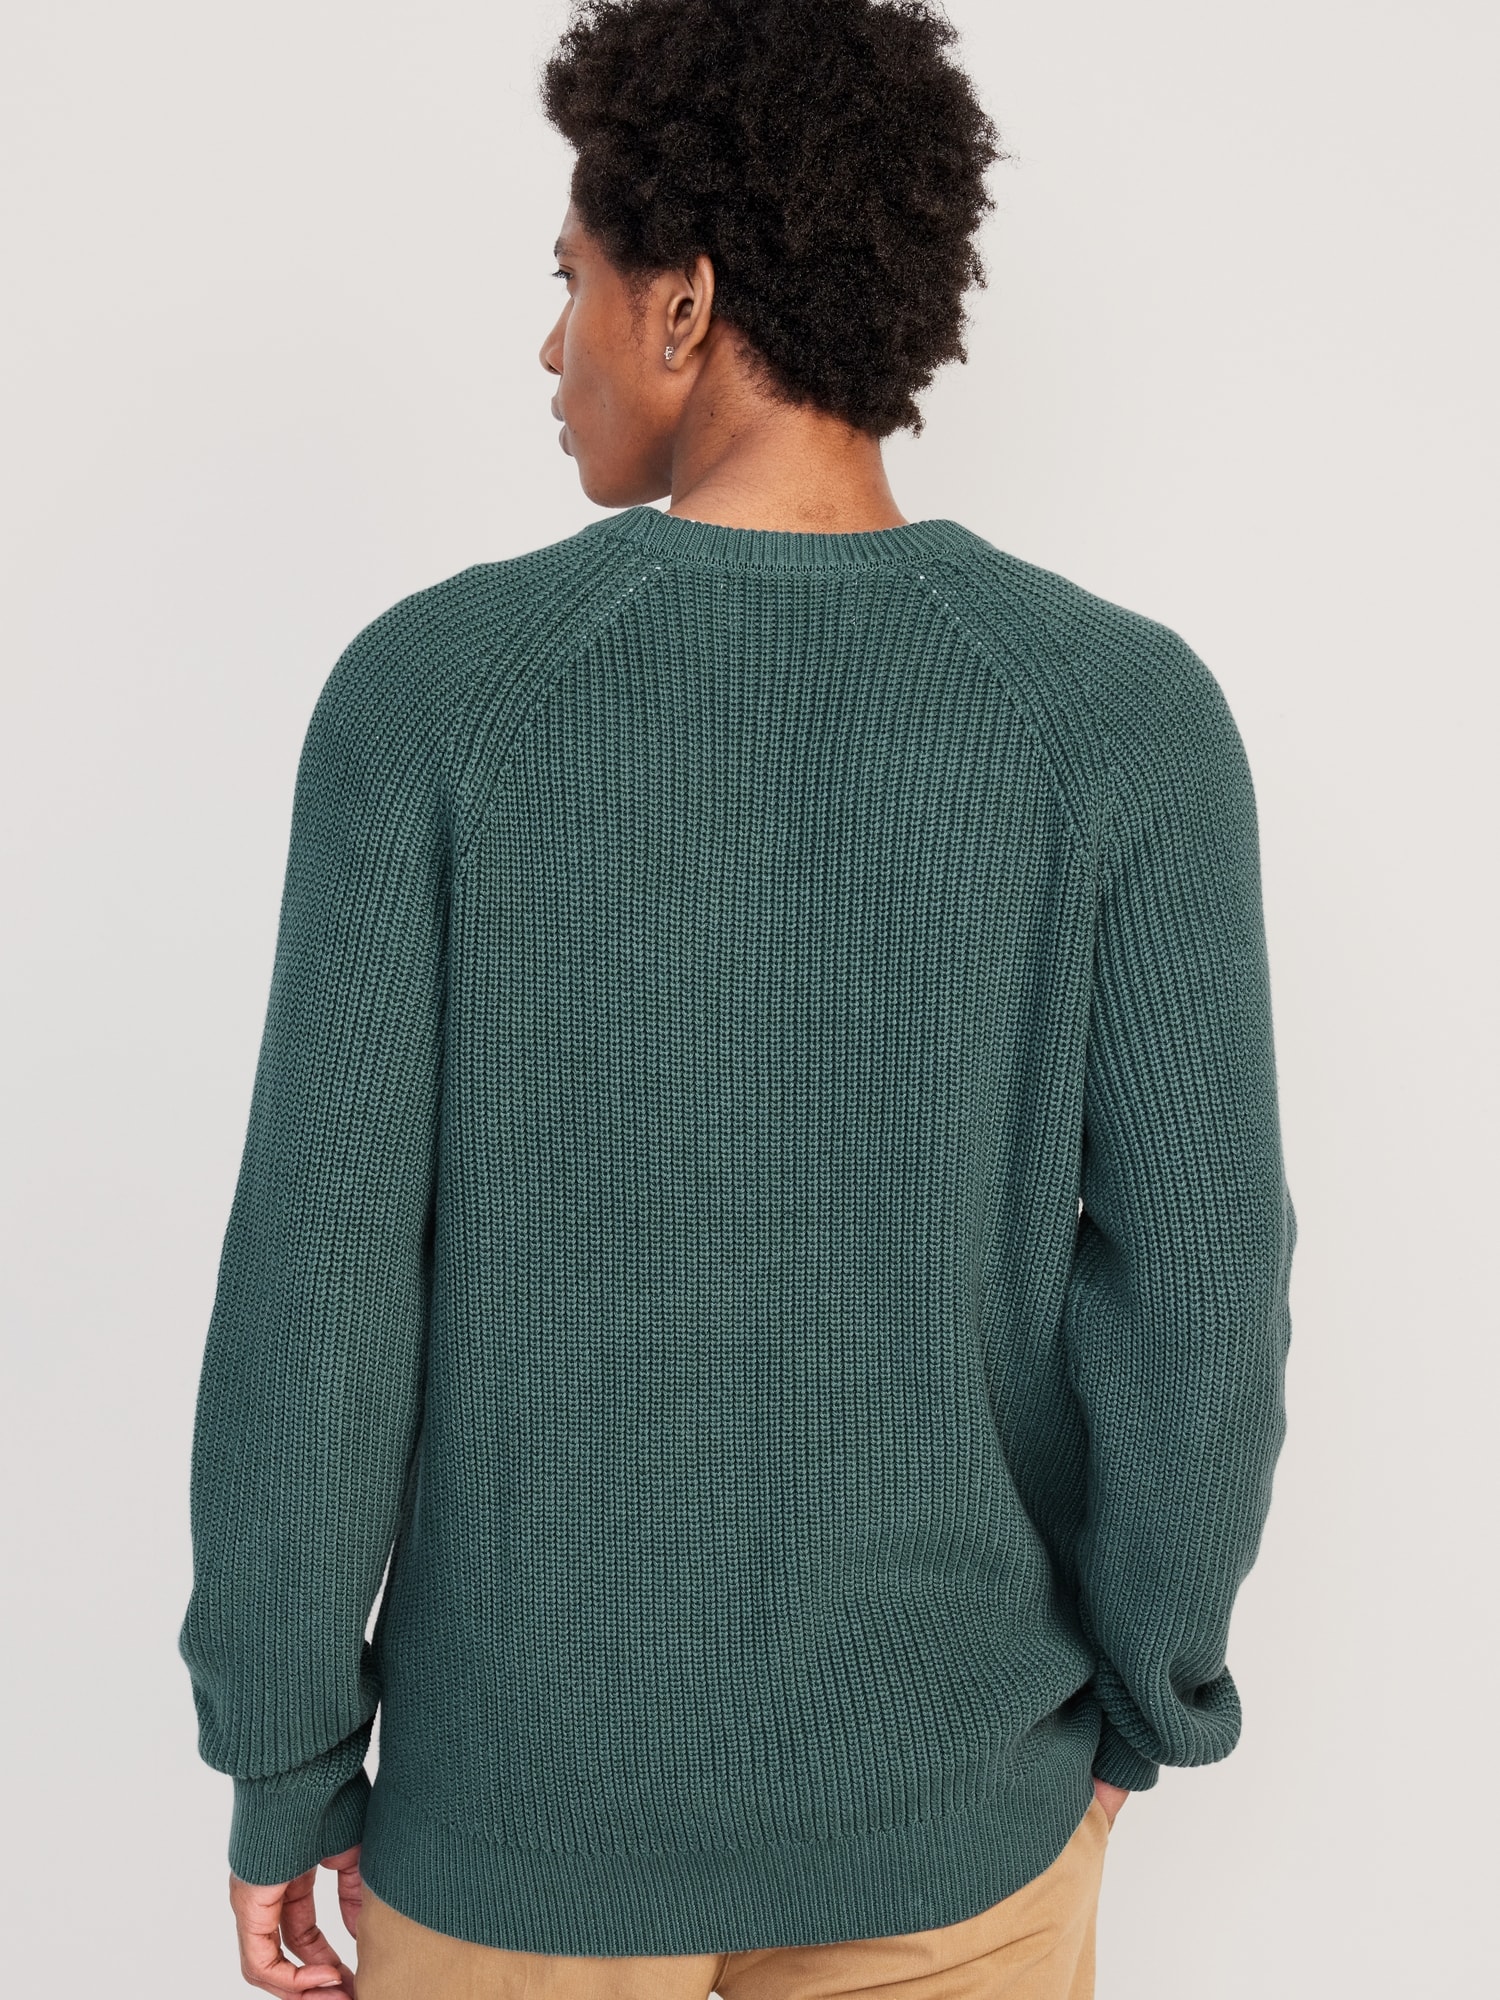 Crew-Neck Shaker-Stitch Sweater for Men | Old Navy